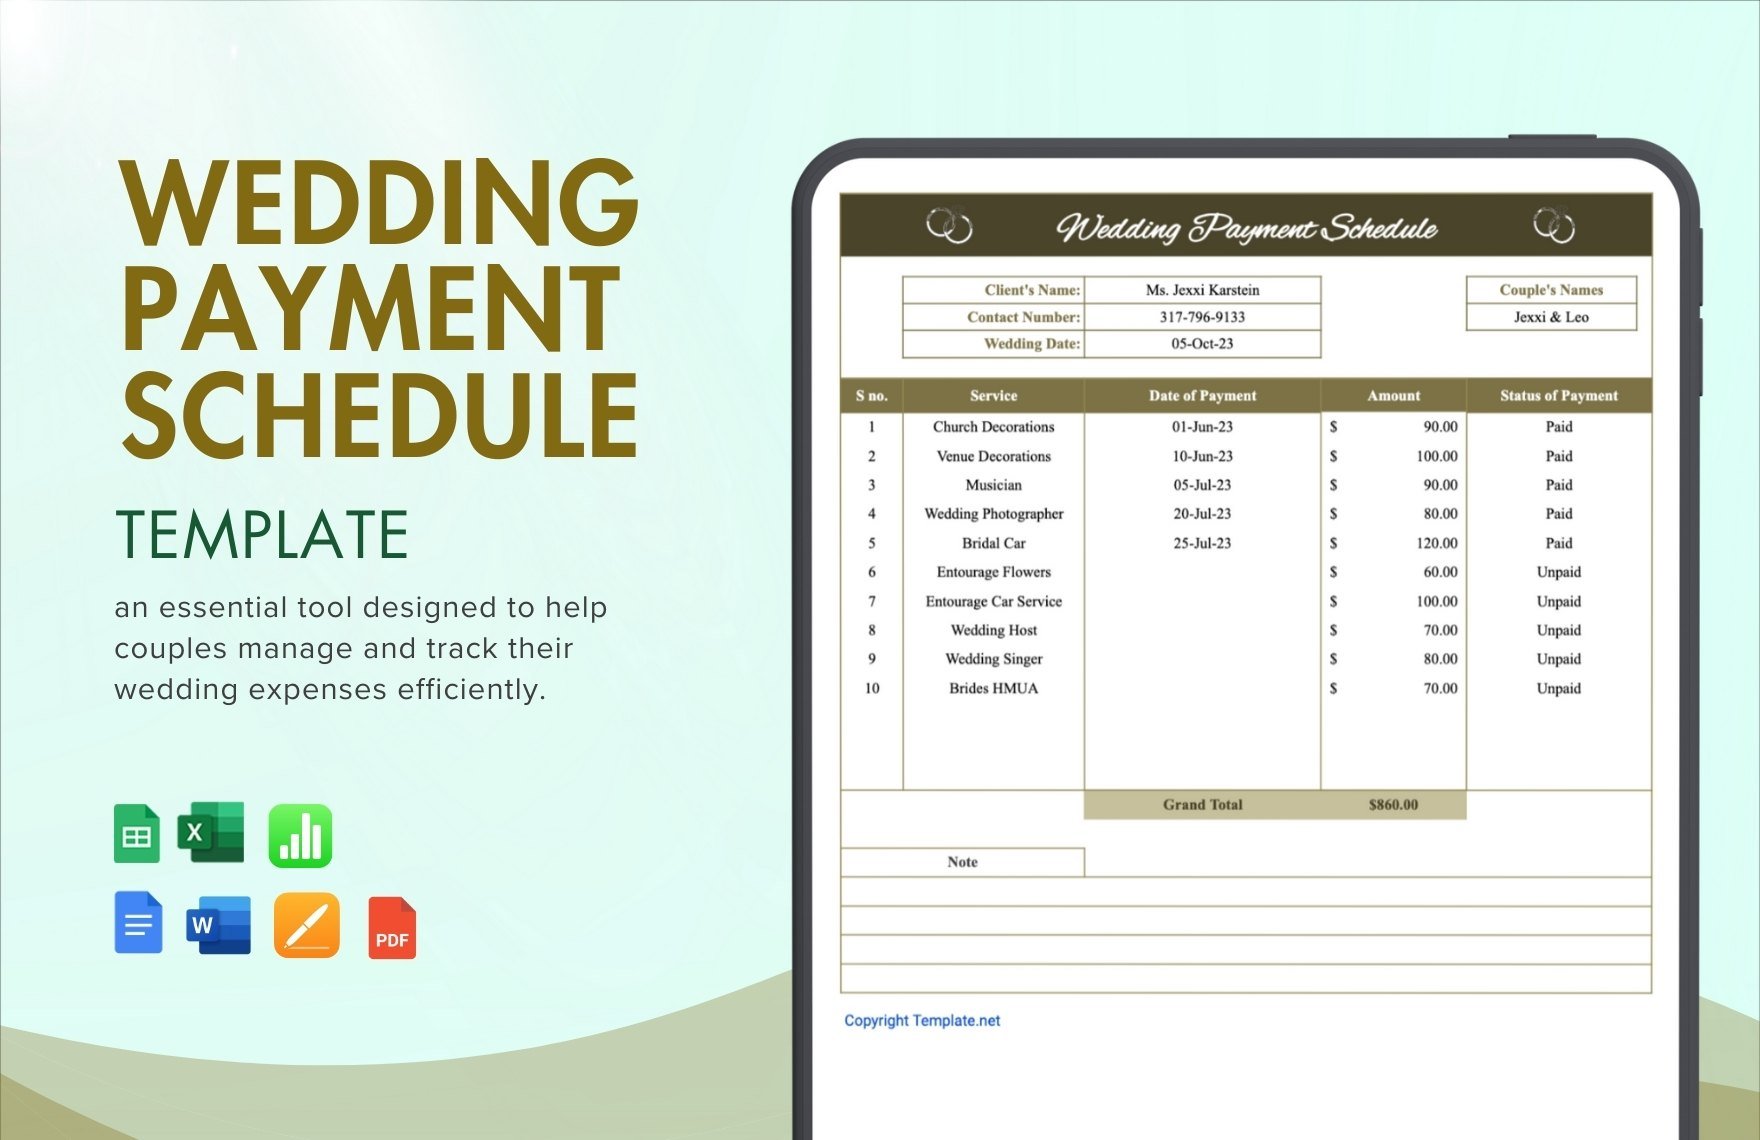 Wedding Payment Schedule Template in Word, Google Docs, Excel, PDF, Google Sheets, Apple Pages, Apple Numbers